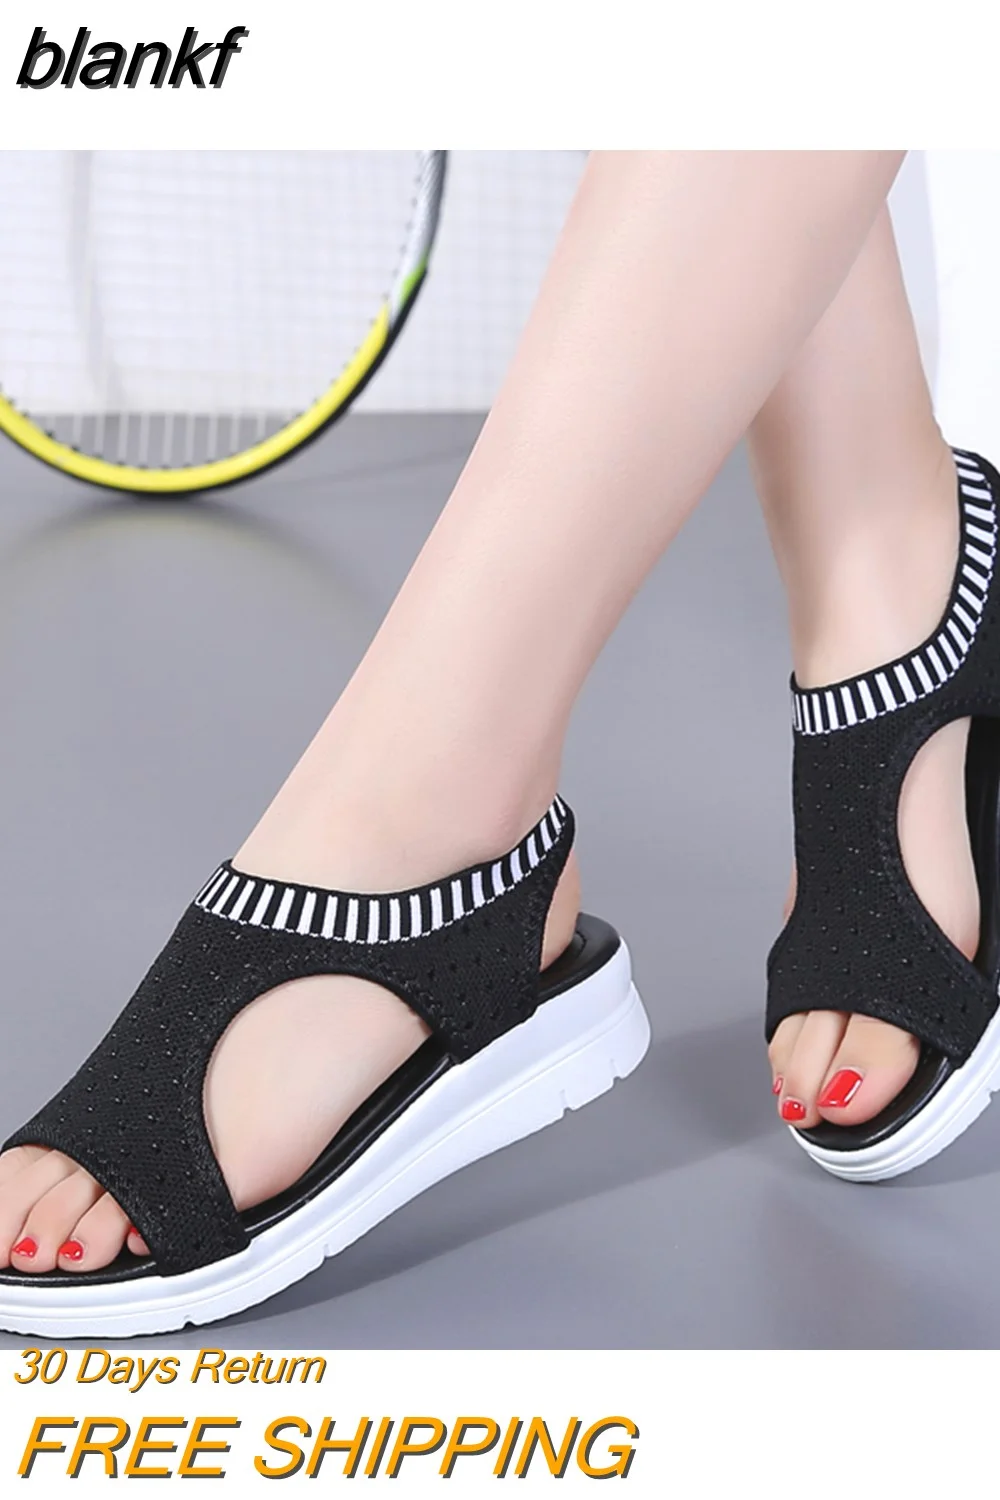 blankf women's shoes 2023 hot sale Rome Women's Sandals Summer Platform Sandal Shoes Casual Wedges Beach Sandals Women Zapatos Mujer